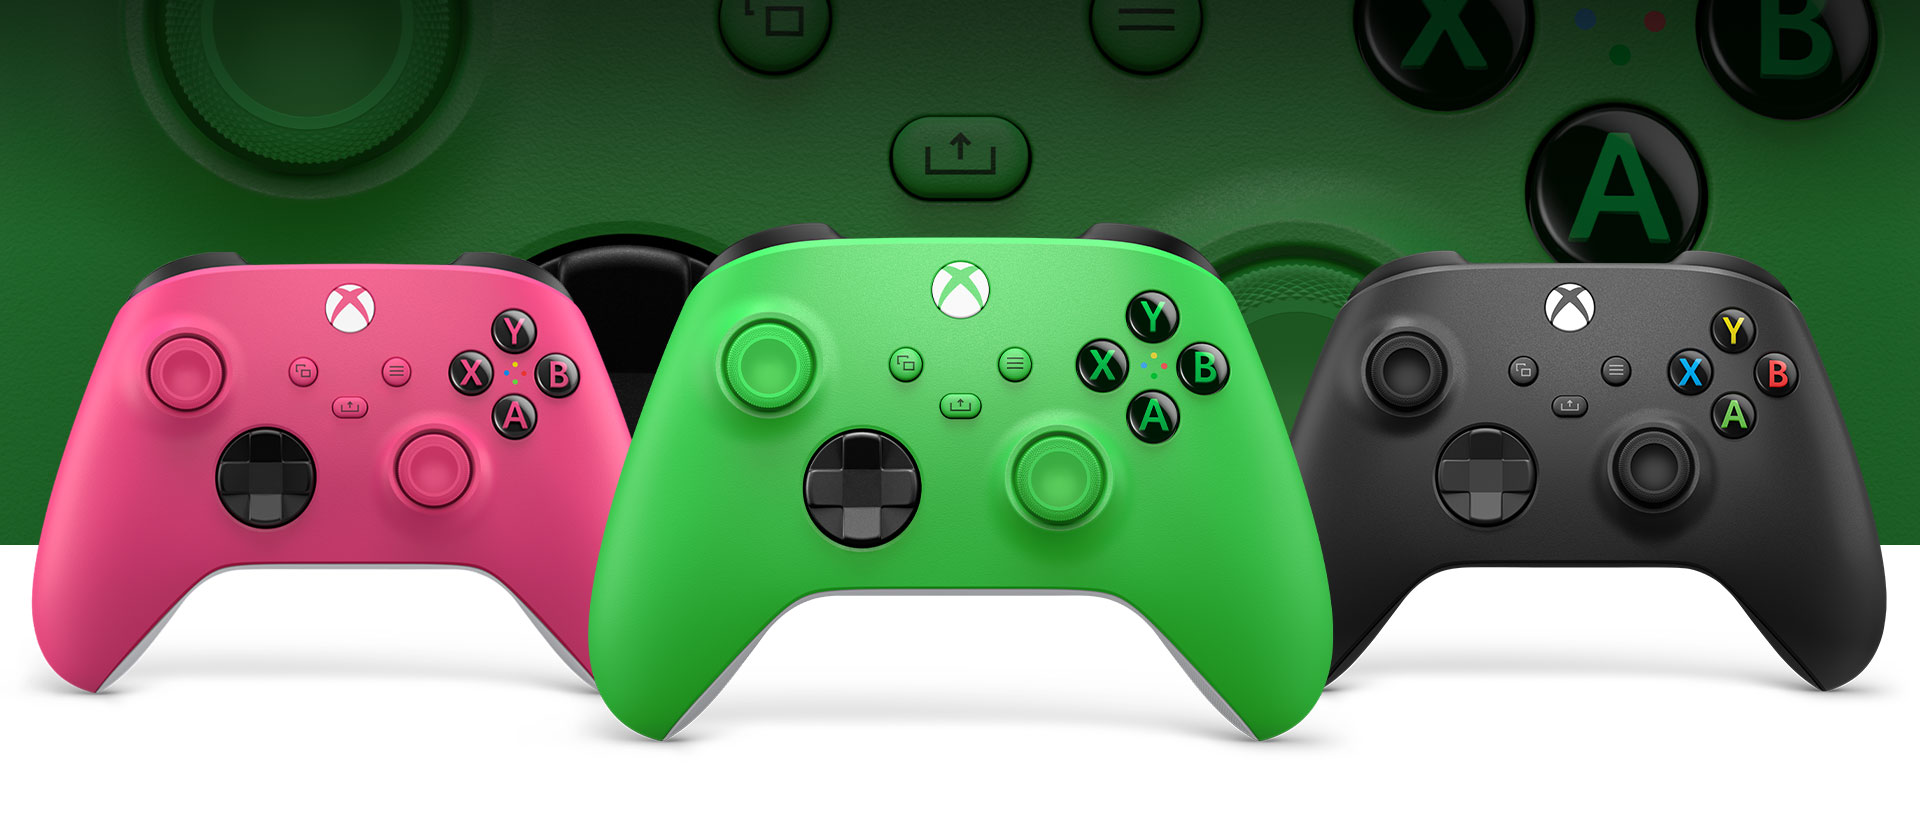 Xbox Green controller in front with Pink on left and Carbon Black on right